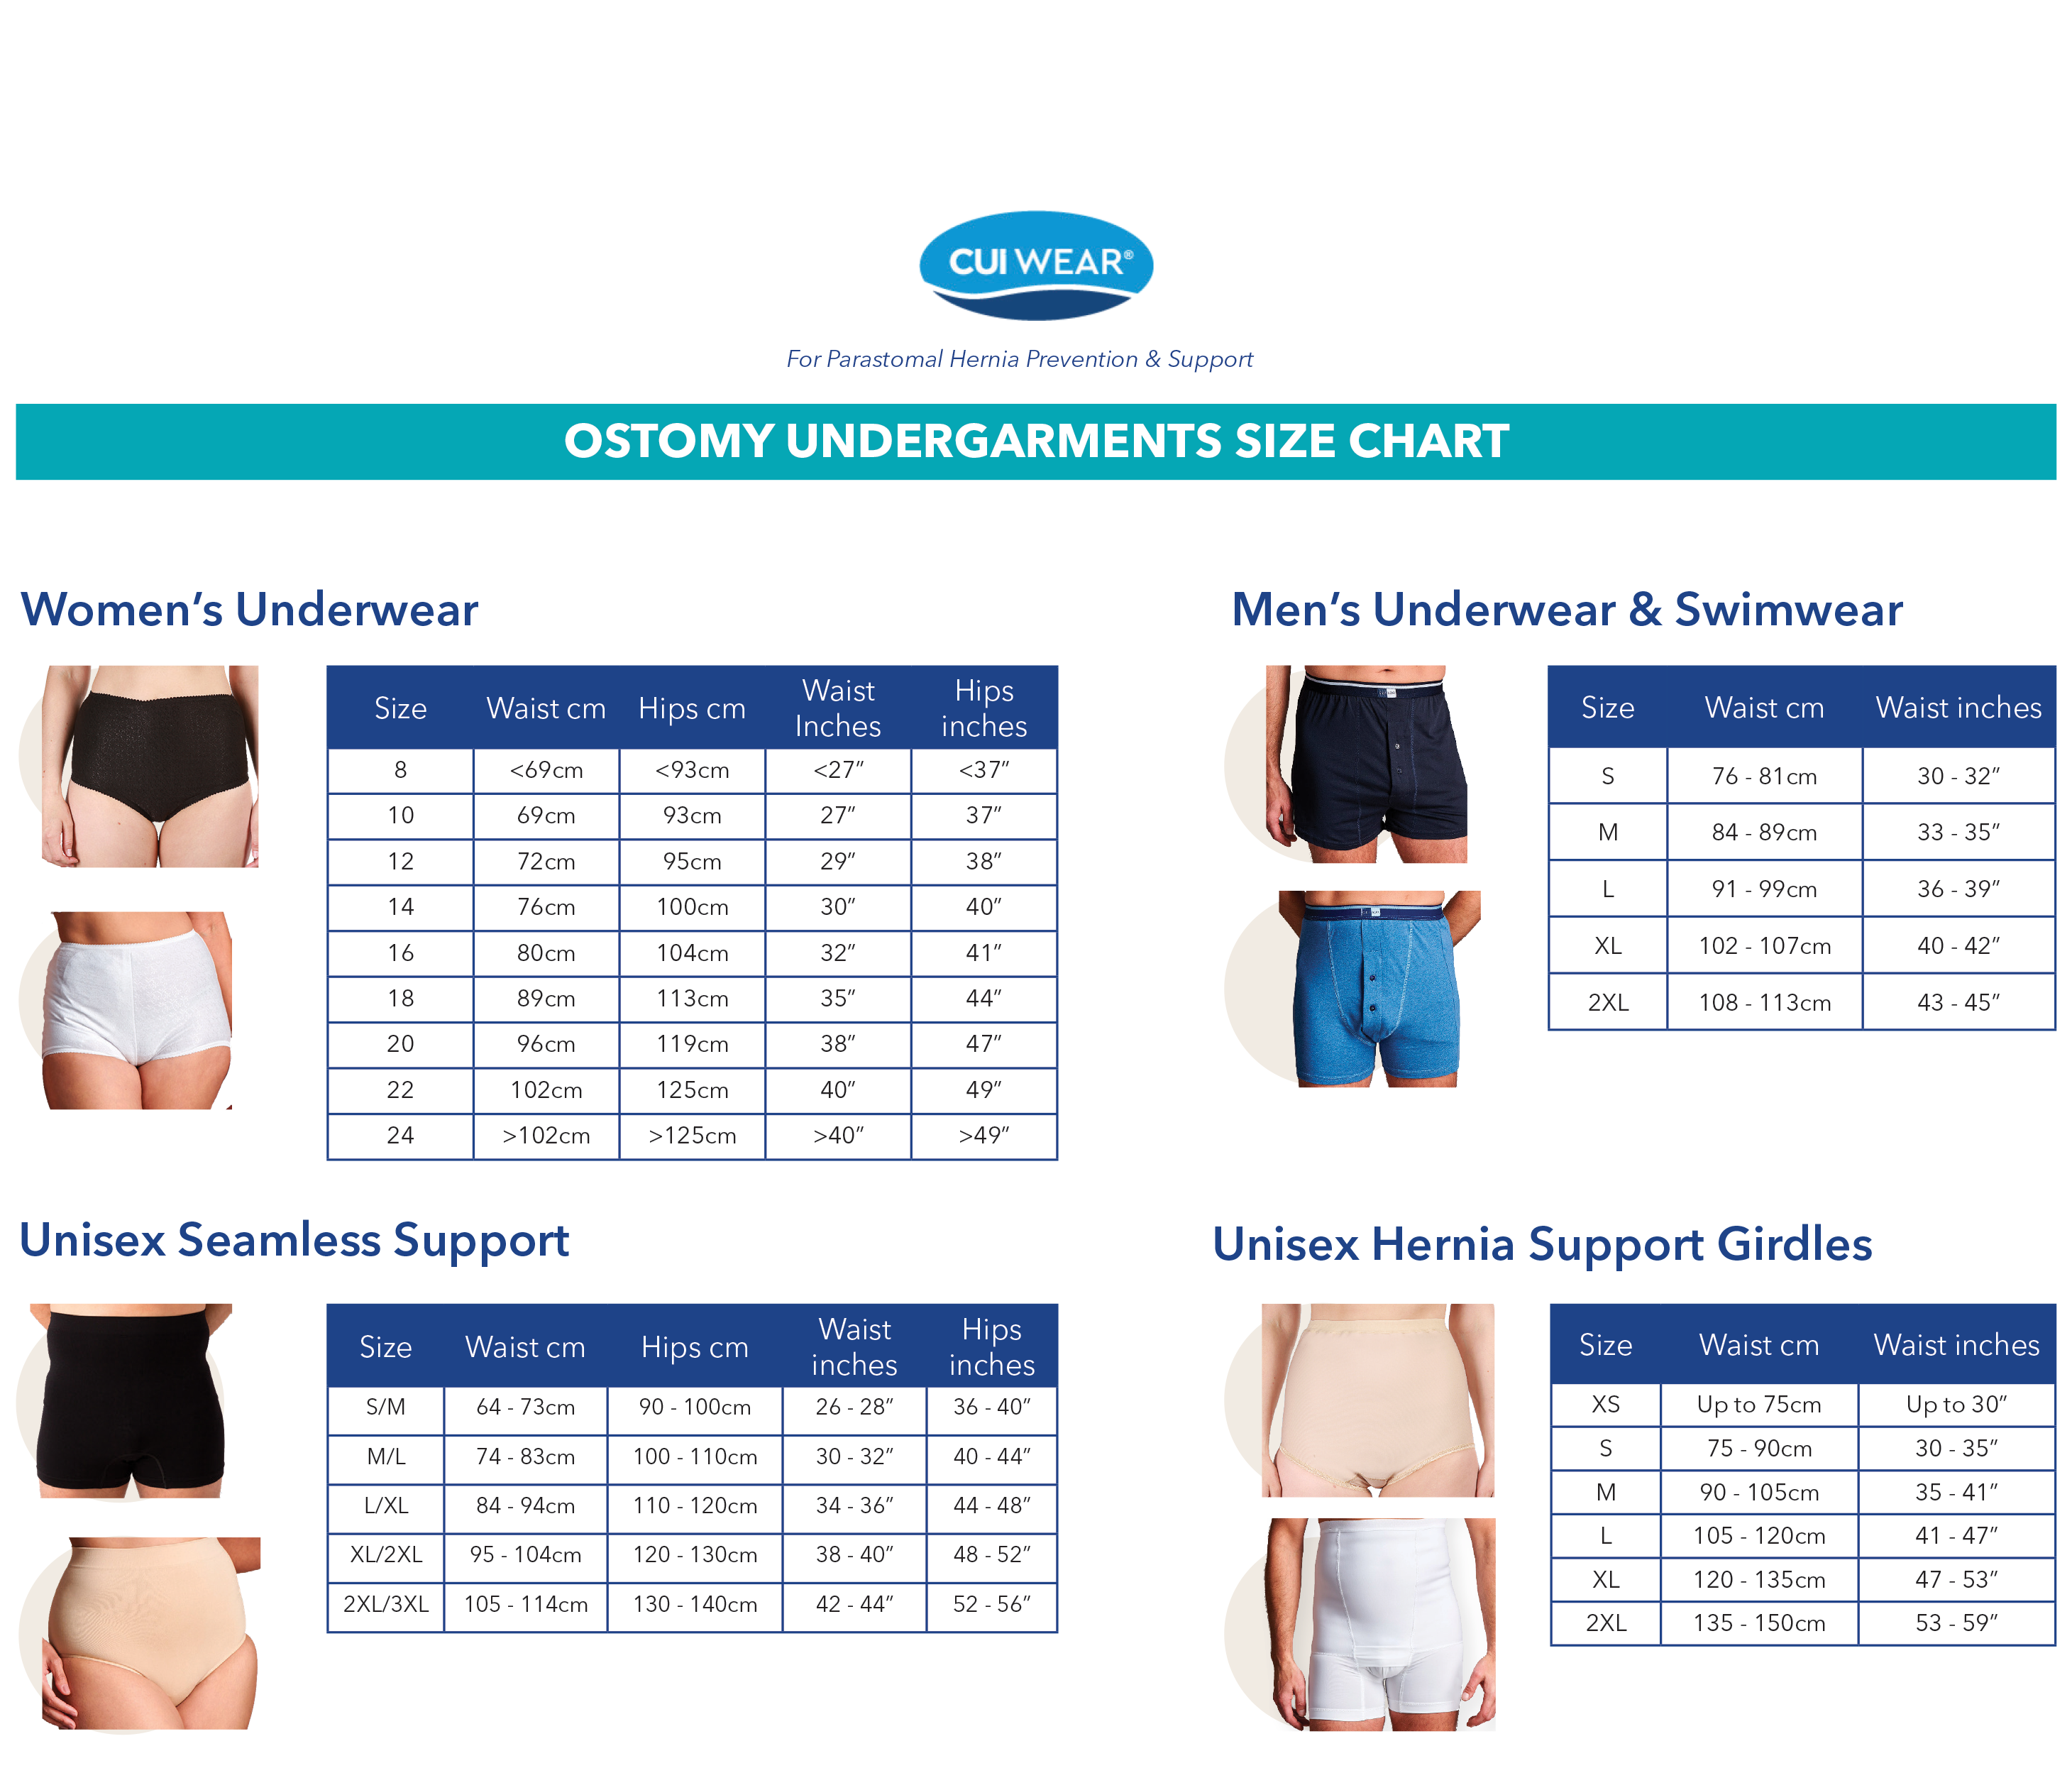 CUI Mens Hernia Low Waist Support Girdle With Legs - 1 each, SMALL, BLACK - 0